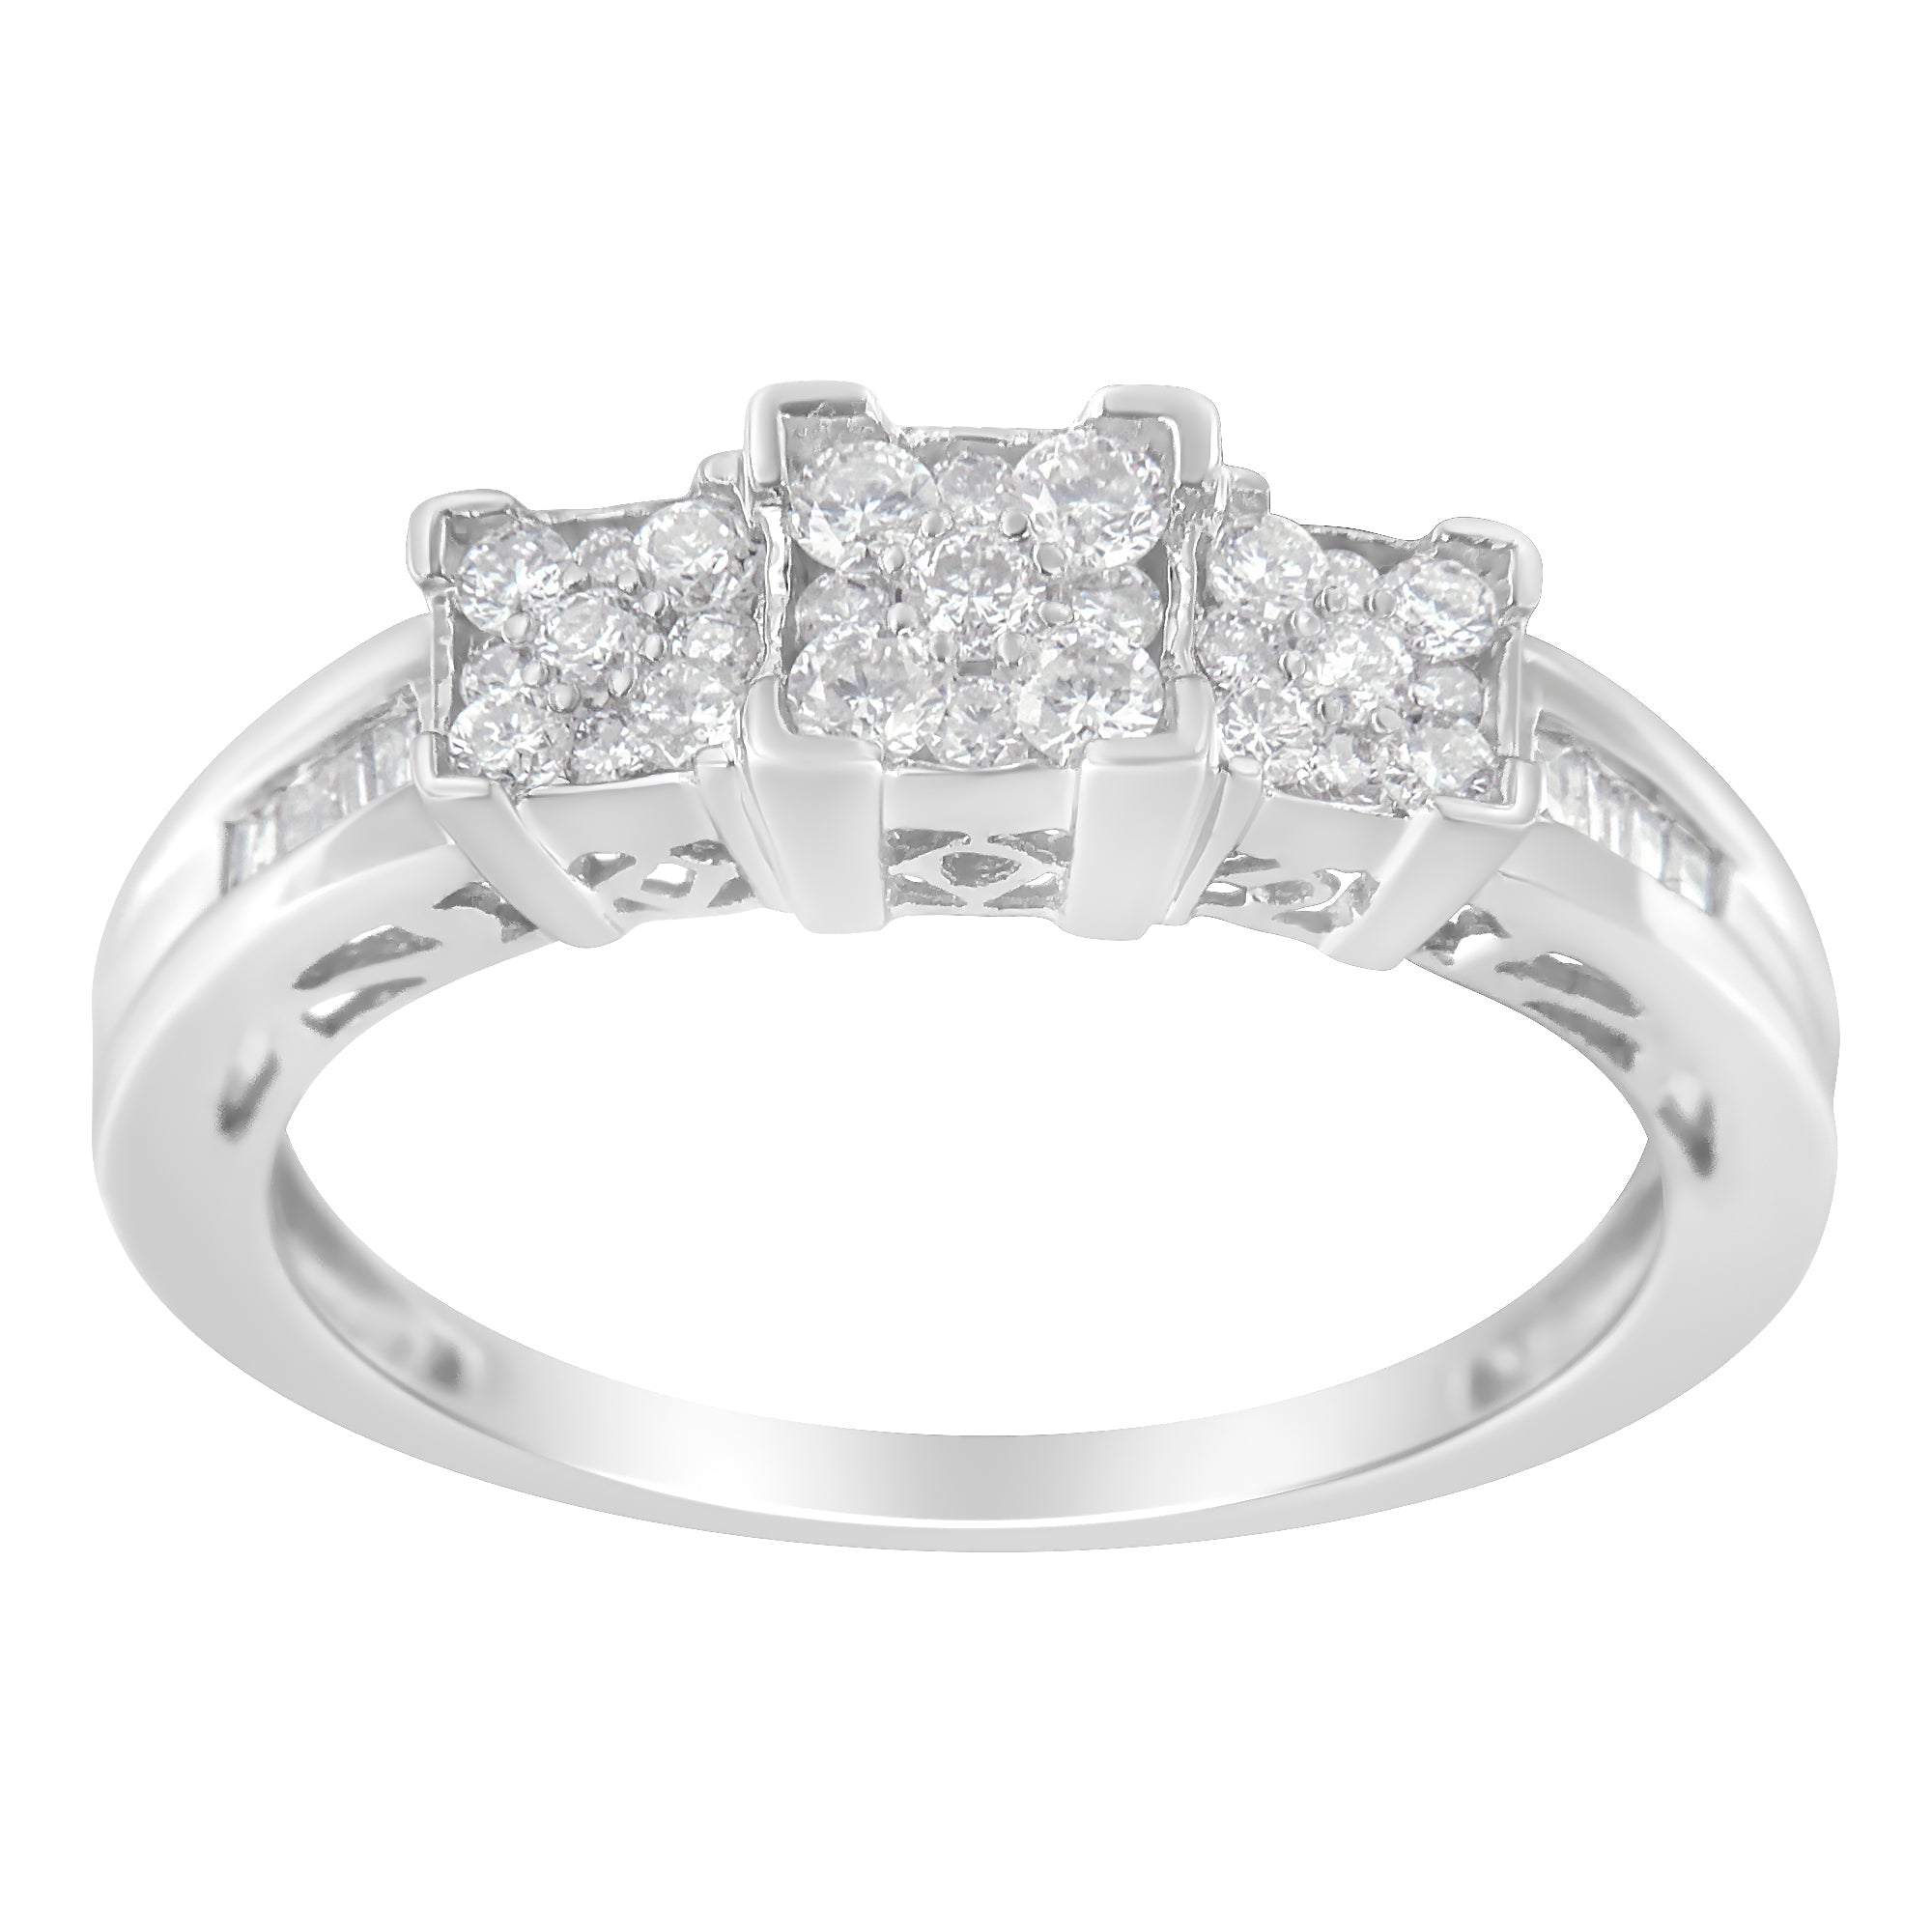 10K-White-Gold-1/2-Cttw-Brilliant-&-Baguette-Cut-Diamond-3-Stone-Design-With-3-Square-Clusters-Engagement-Ring-(H-I-Color,-Si2-I1-Clarity)-Size-6-3/4-Rings